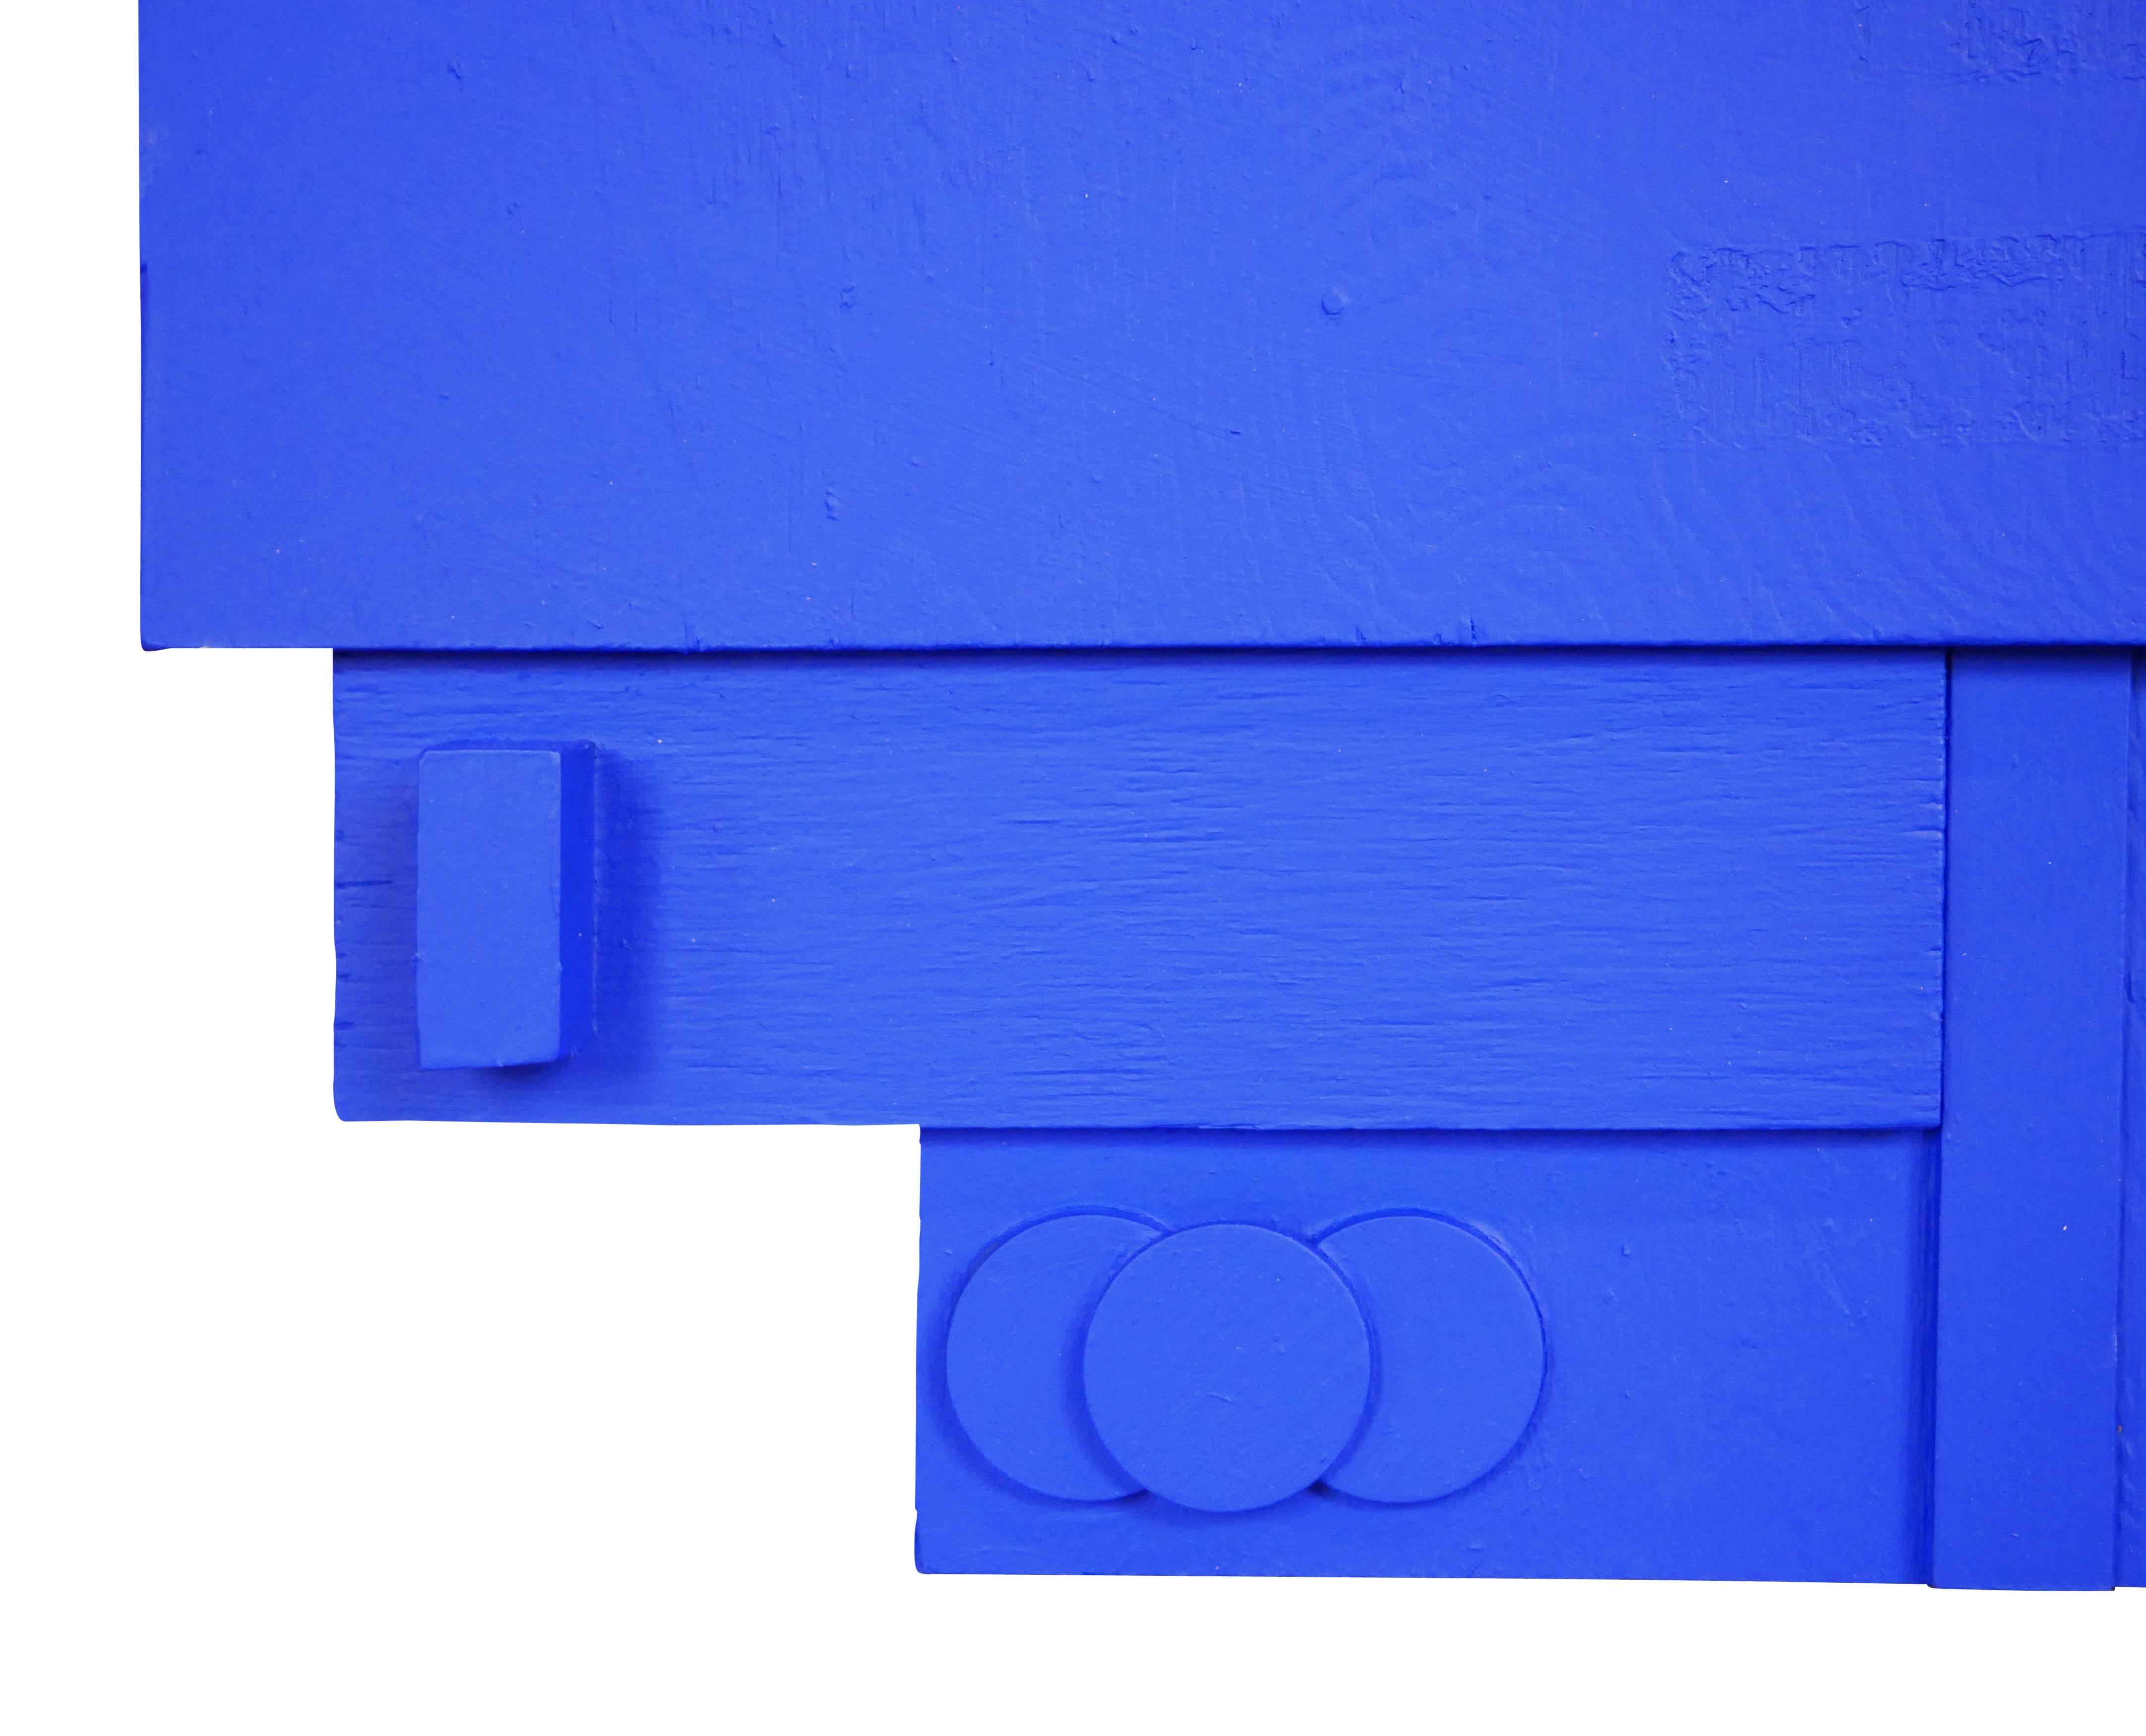 Abstract wall sculpture featuring three dimensional geometric shapes painted with bright blue paint. The uniqueness of this blue does not derive from the ultramarine pigment, but rather from the matte, synthetic resin binder in which the color is